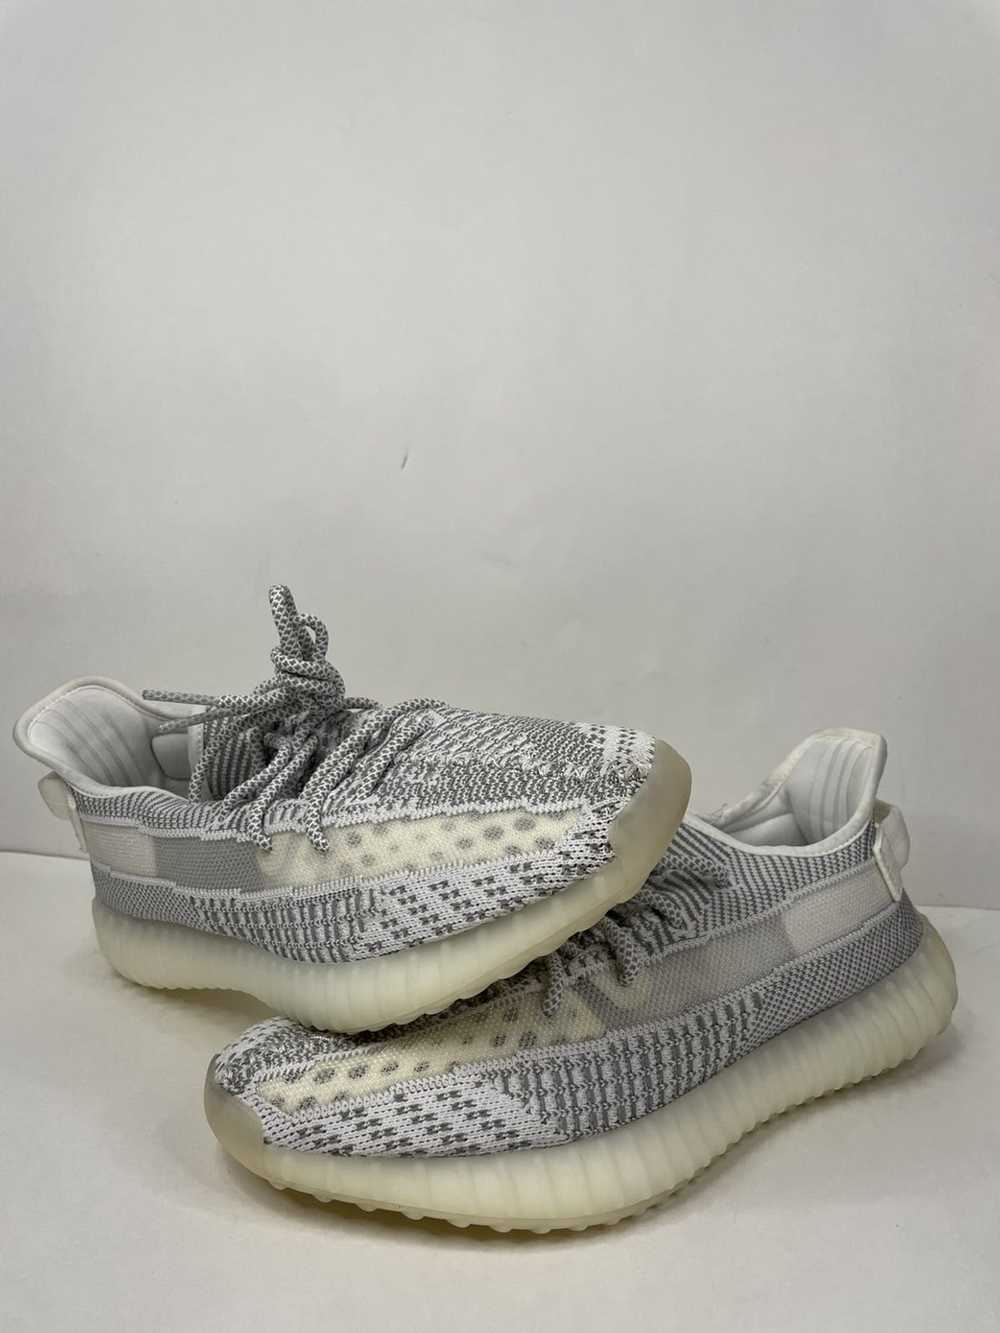 Adidas Yeezy Boost 350 V2 Static Non Reflective - image 1